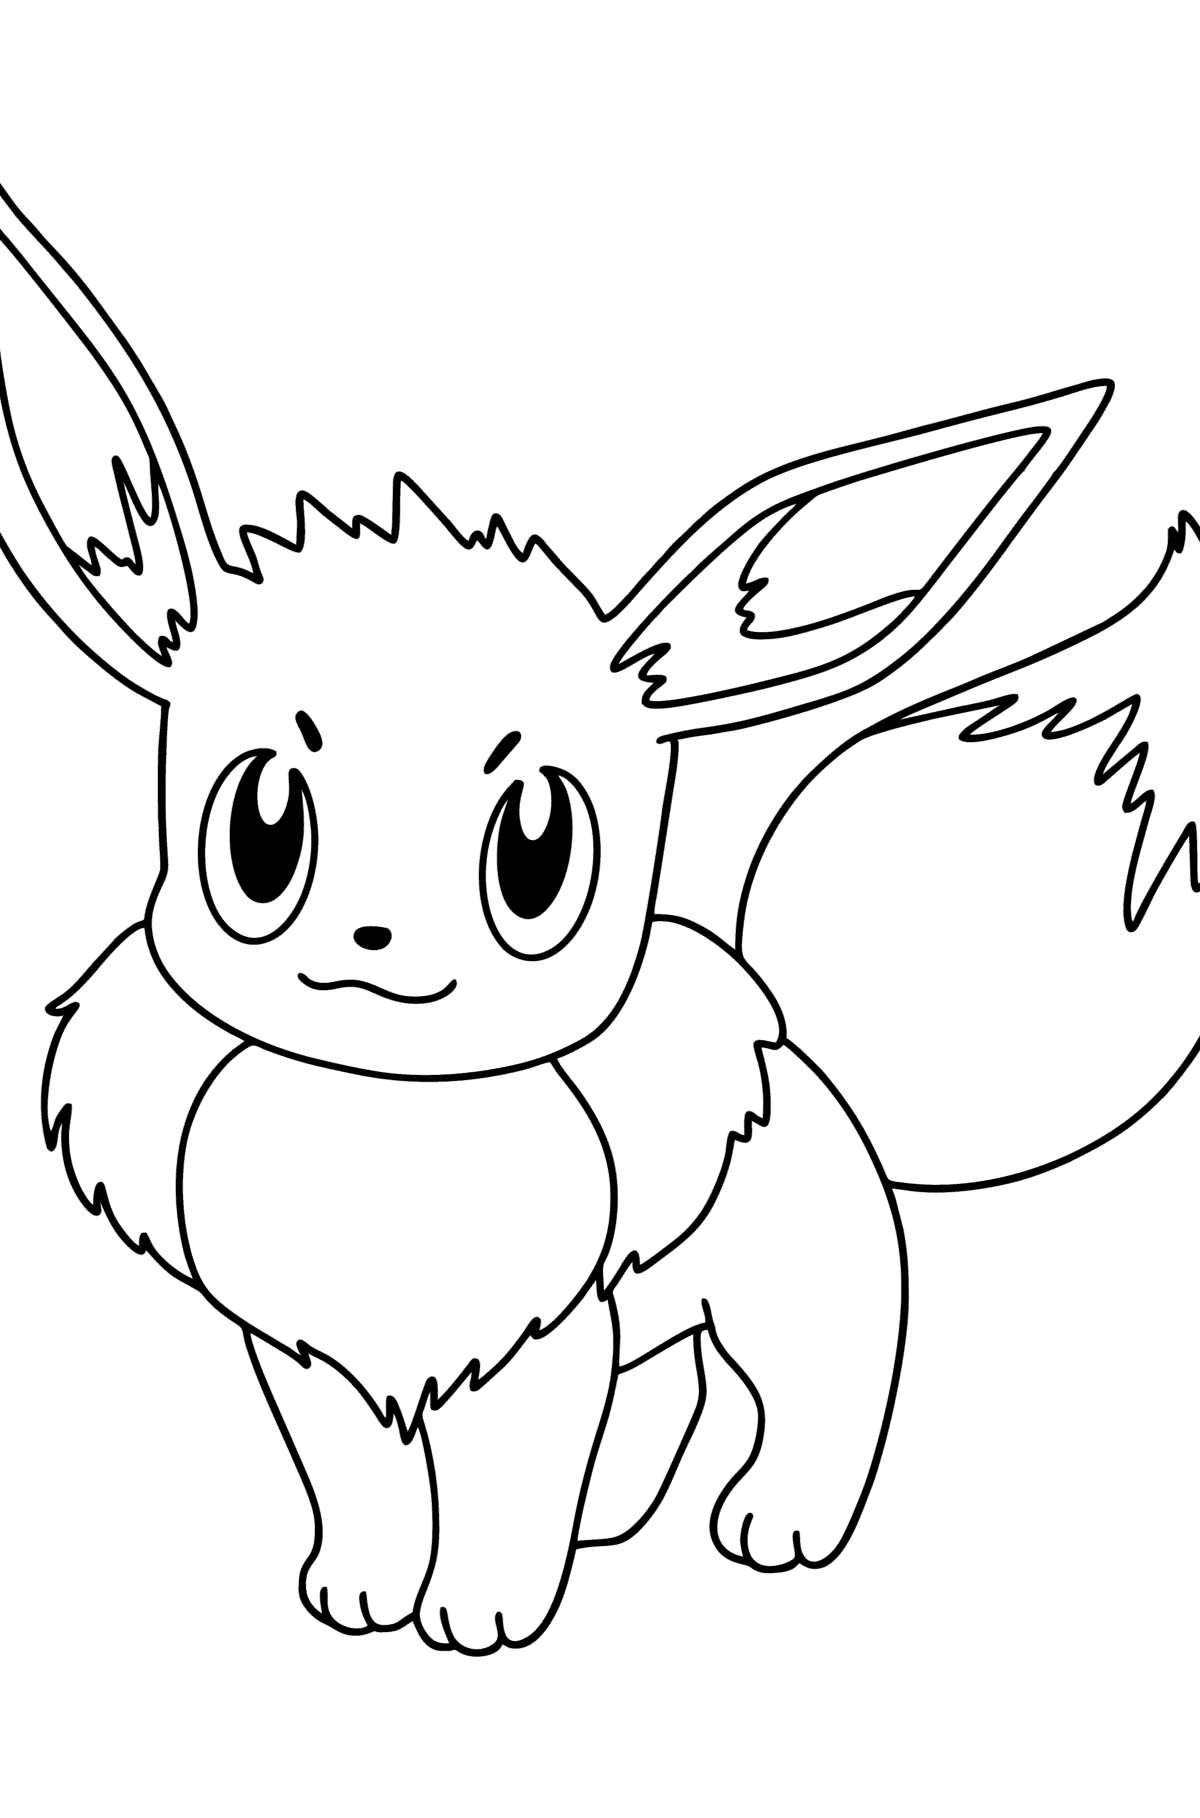 200 Eevee Coloring Pages: Evolve Your Art Skills 111